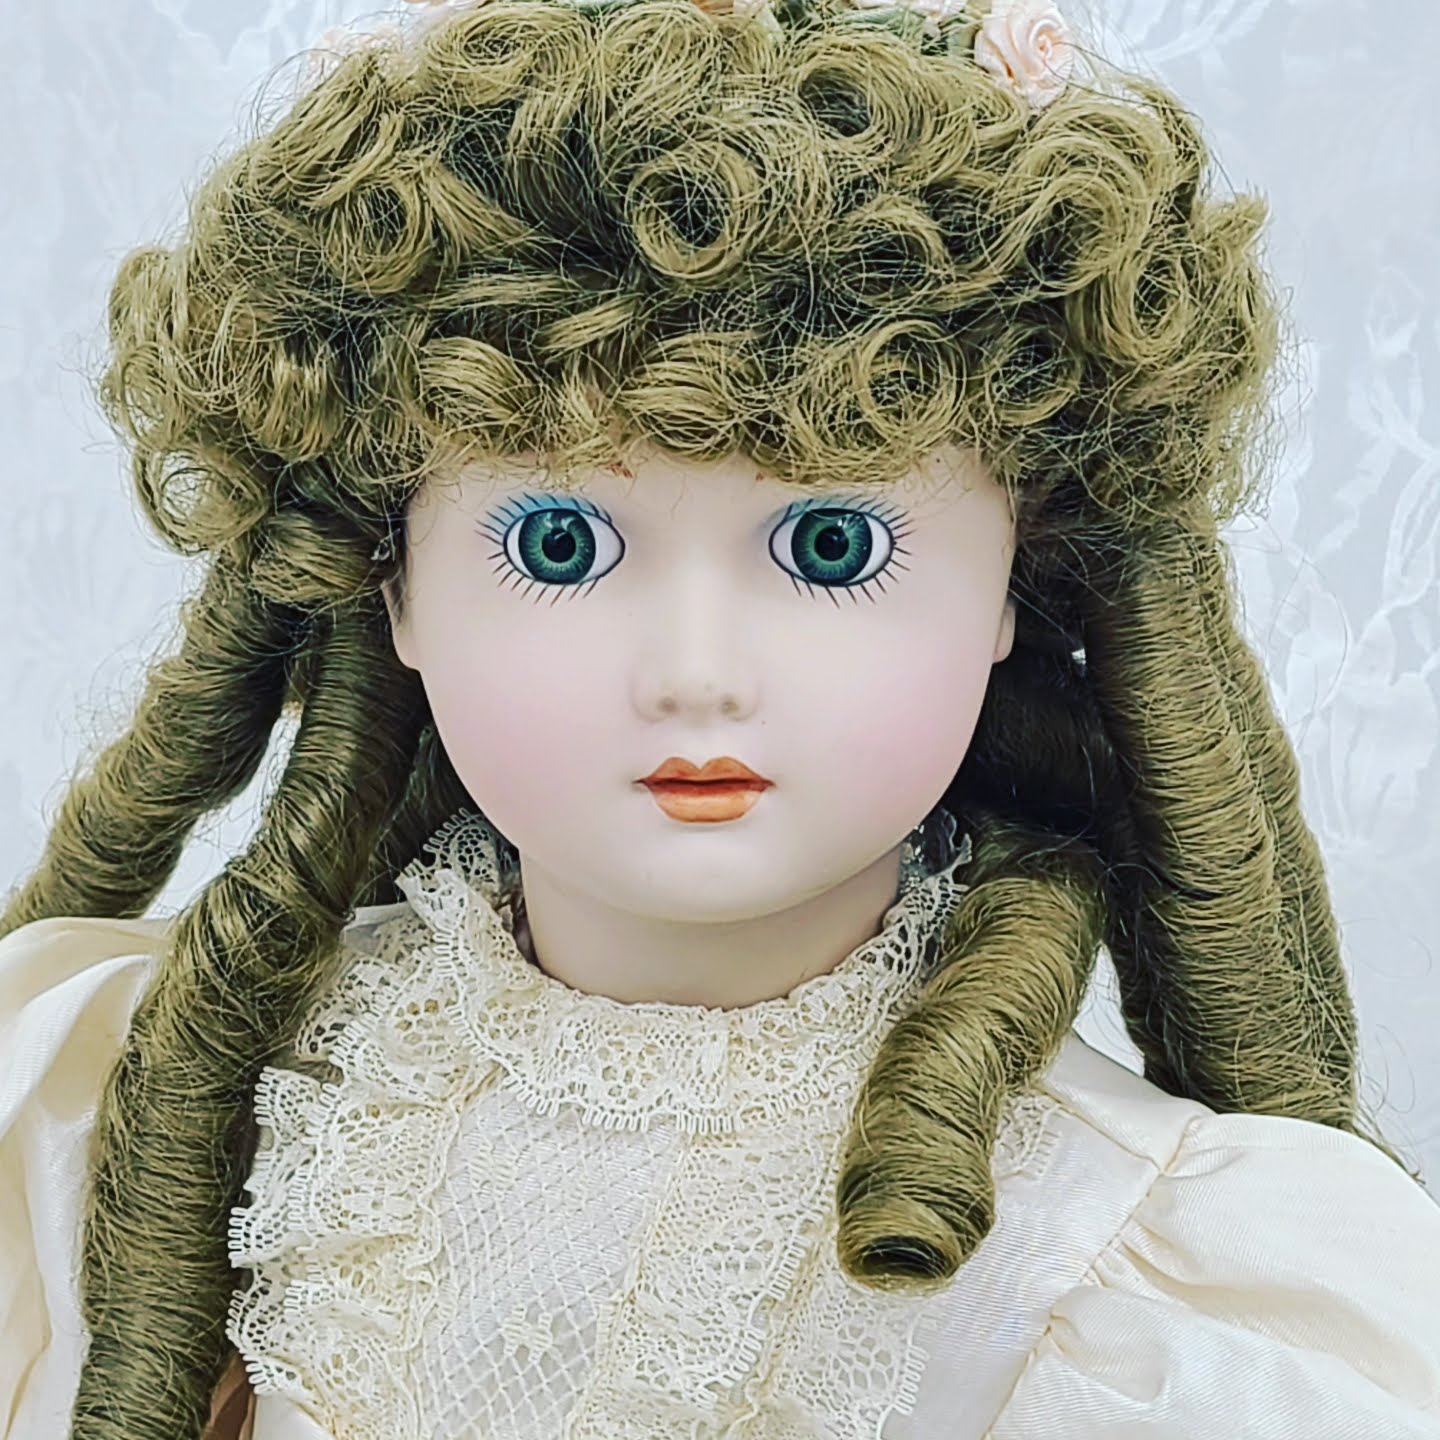 Hélène Haunted Doll ~ 17" Signed Jumeau Bébé French Reproduction ~ Paranormal ~ Mental Illness ~ Trauma and Abuse ~ Institutionalized